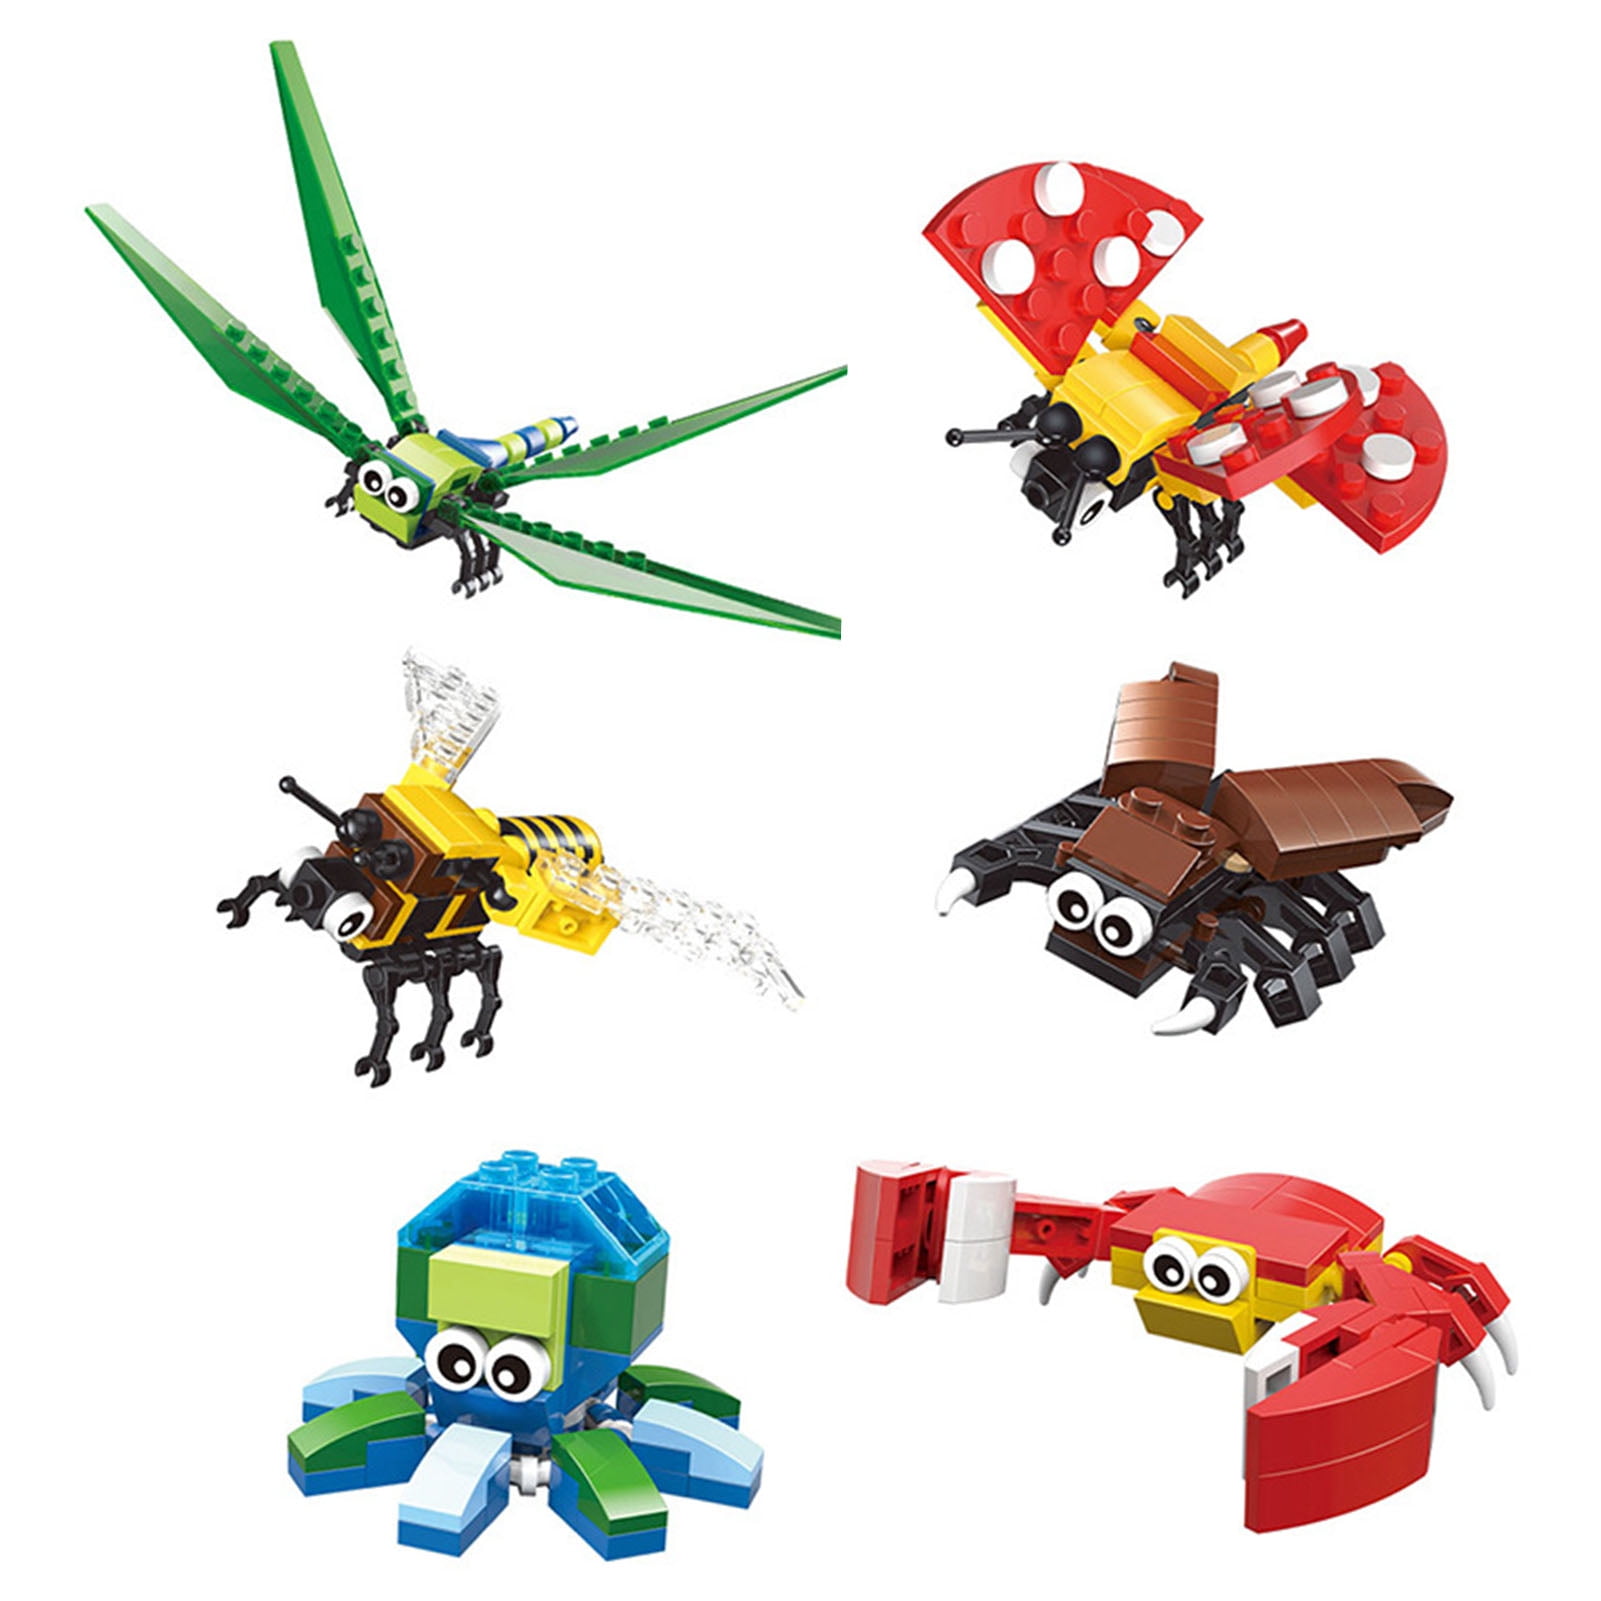 Insect Bee and Butterfly Building Blocks Educational Toys for Kids Birthday Gift 